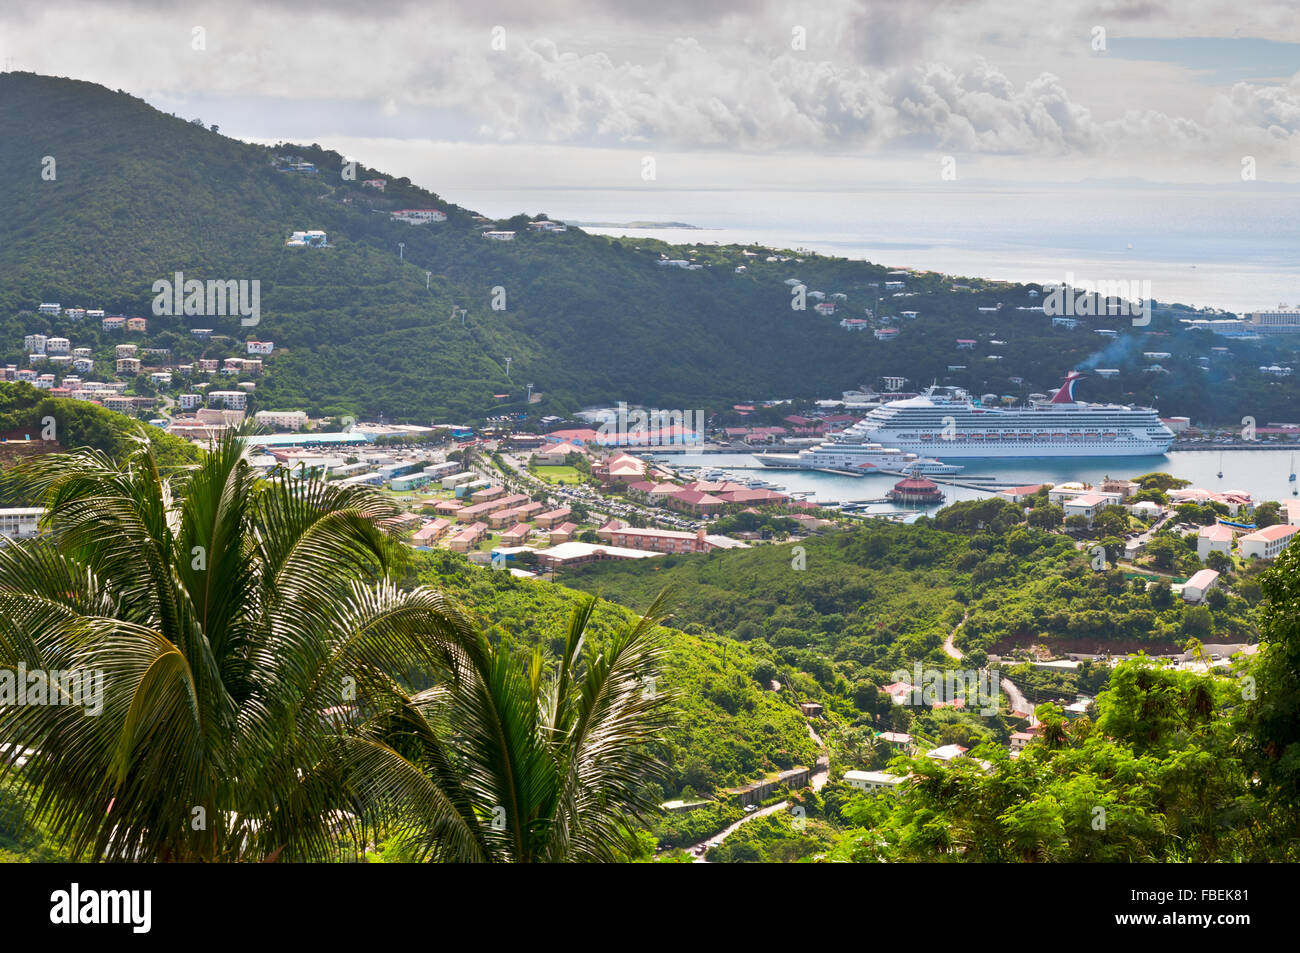 The Carnival Victory cruise ship is moored in the Charlotte Amalie Stock Photo